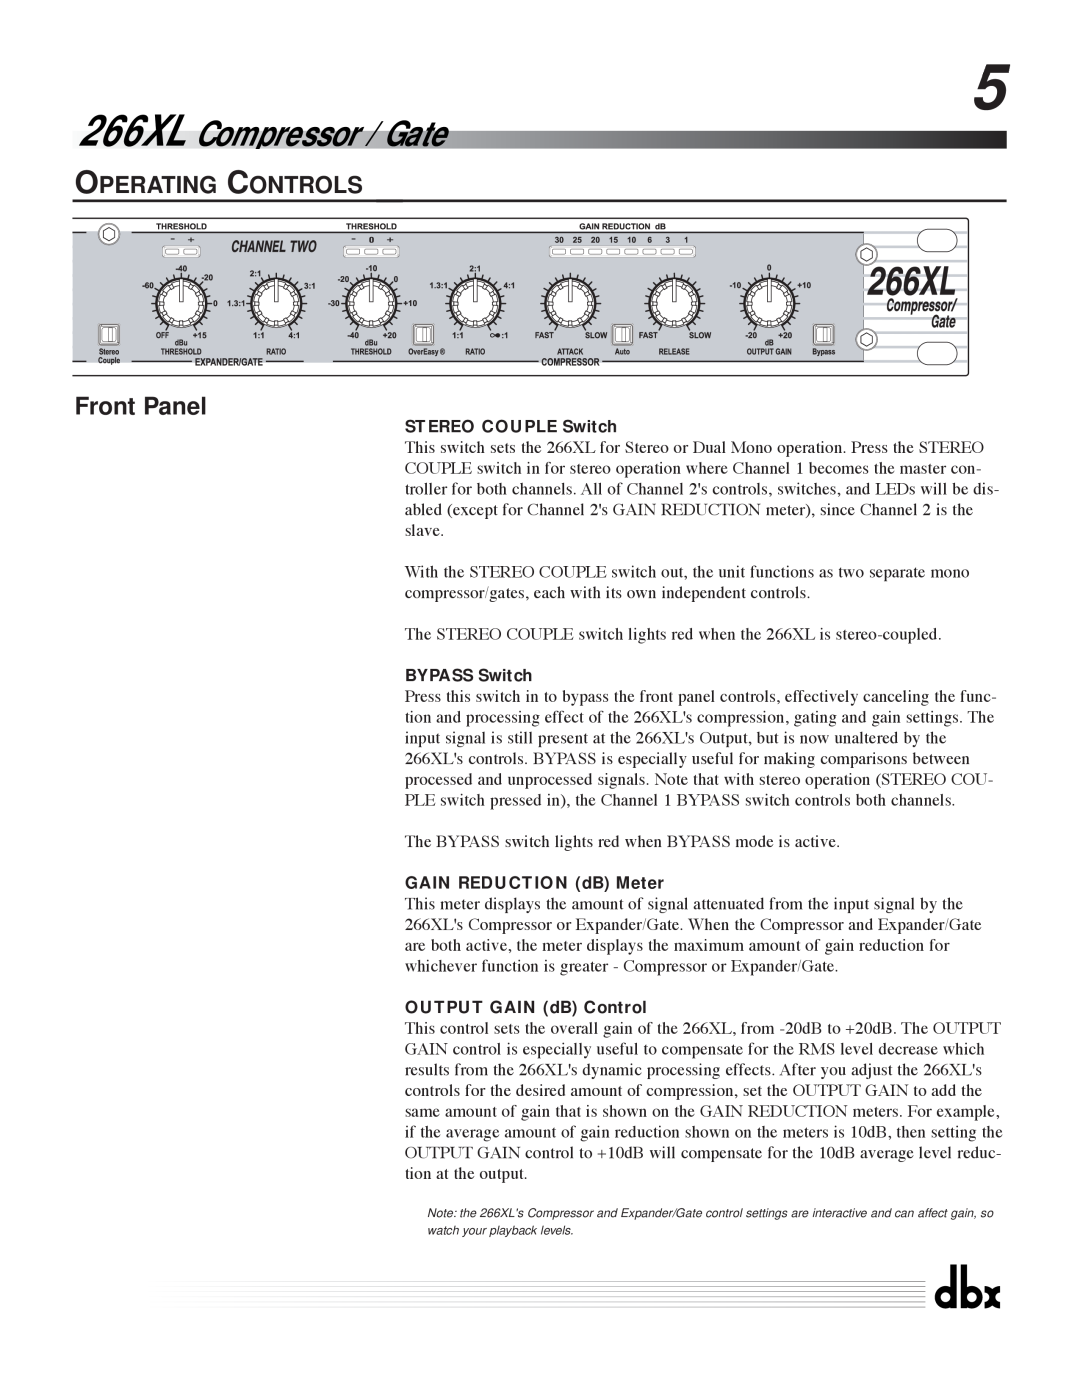 dbx Pro manuel dutilisation OPERATING CONTROLS Front Panel, 266XL Compressor / Gate, STEREO COUPLE Switch, BYPASS Switch 